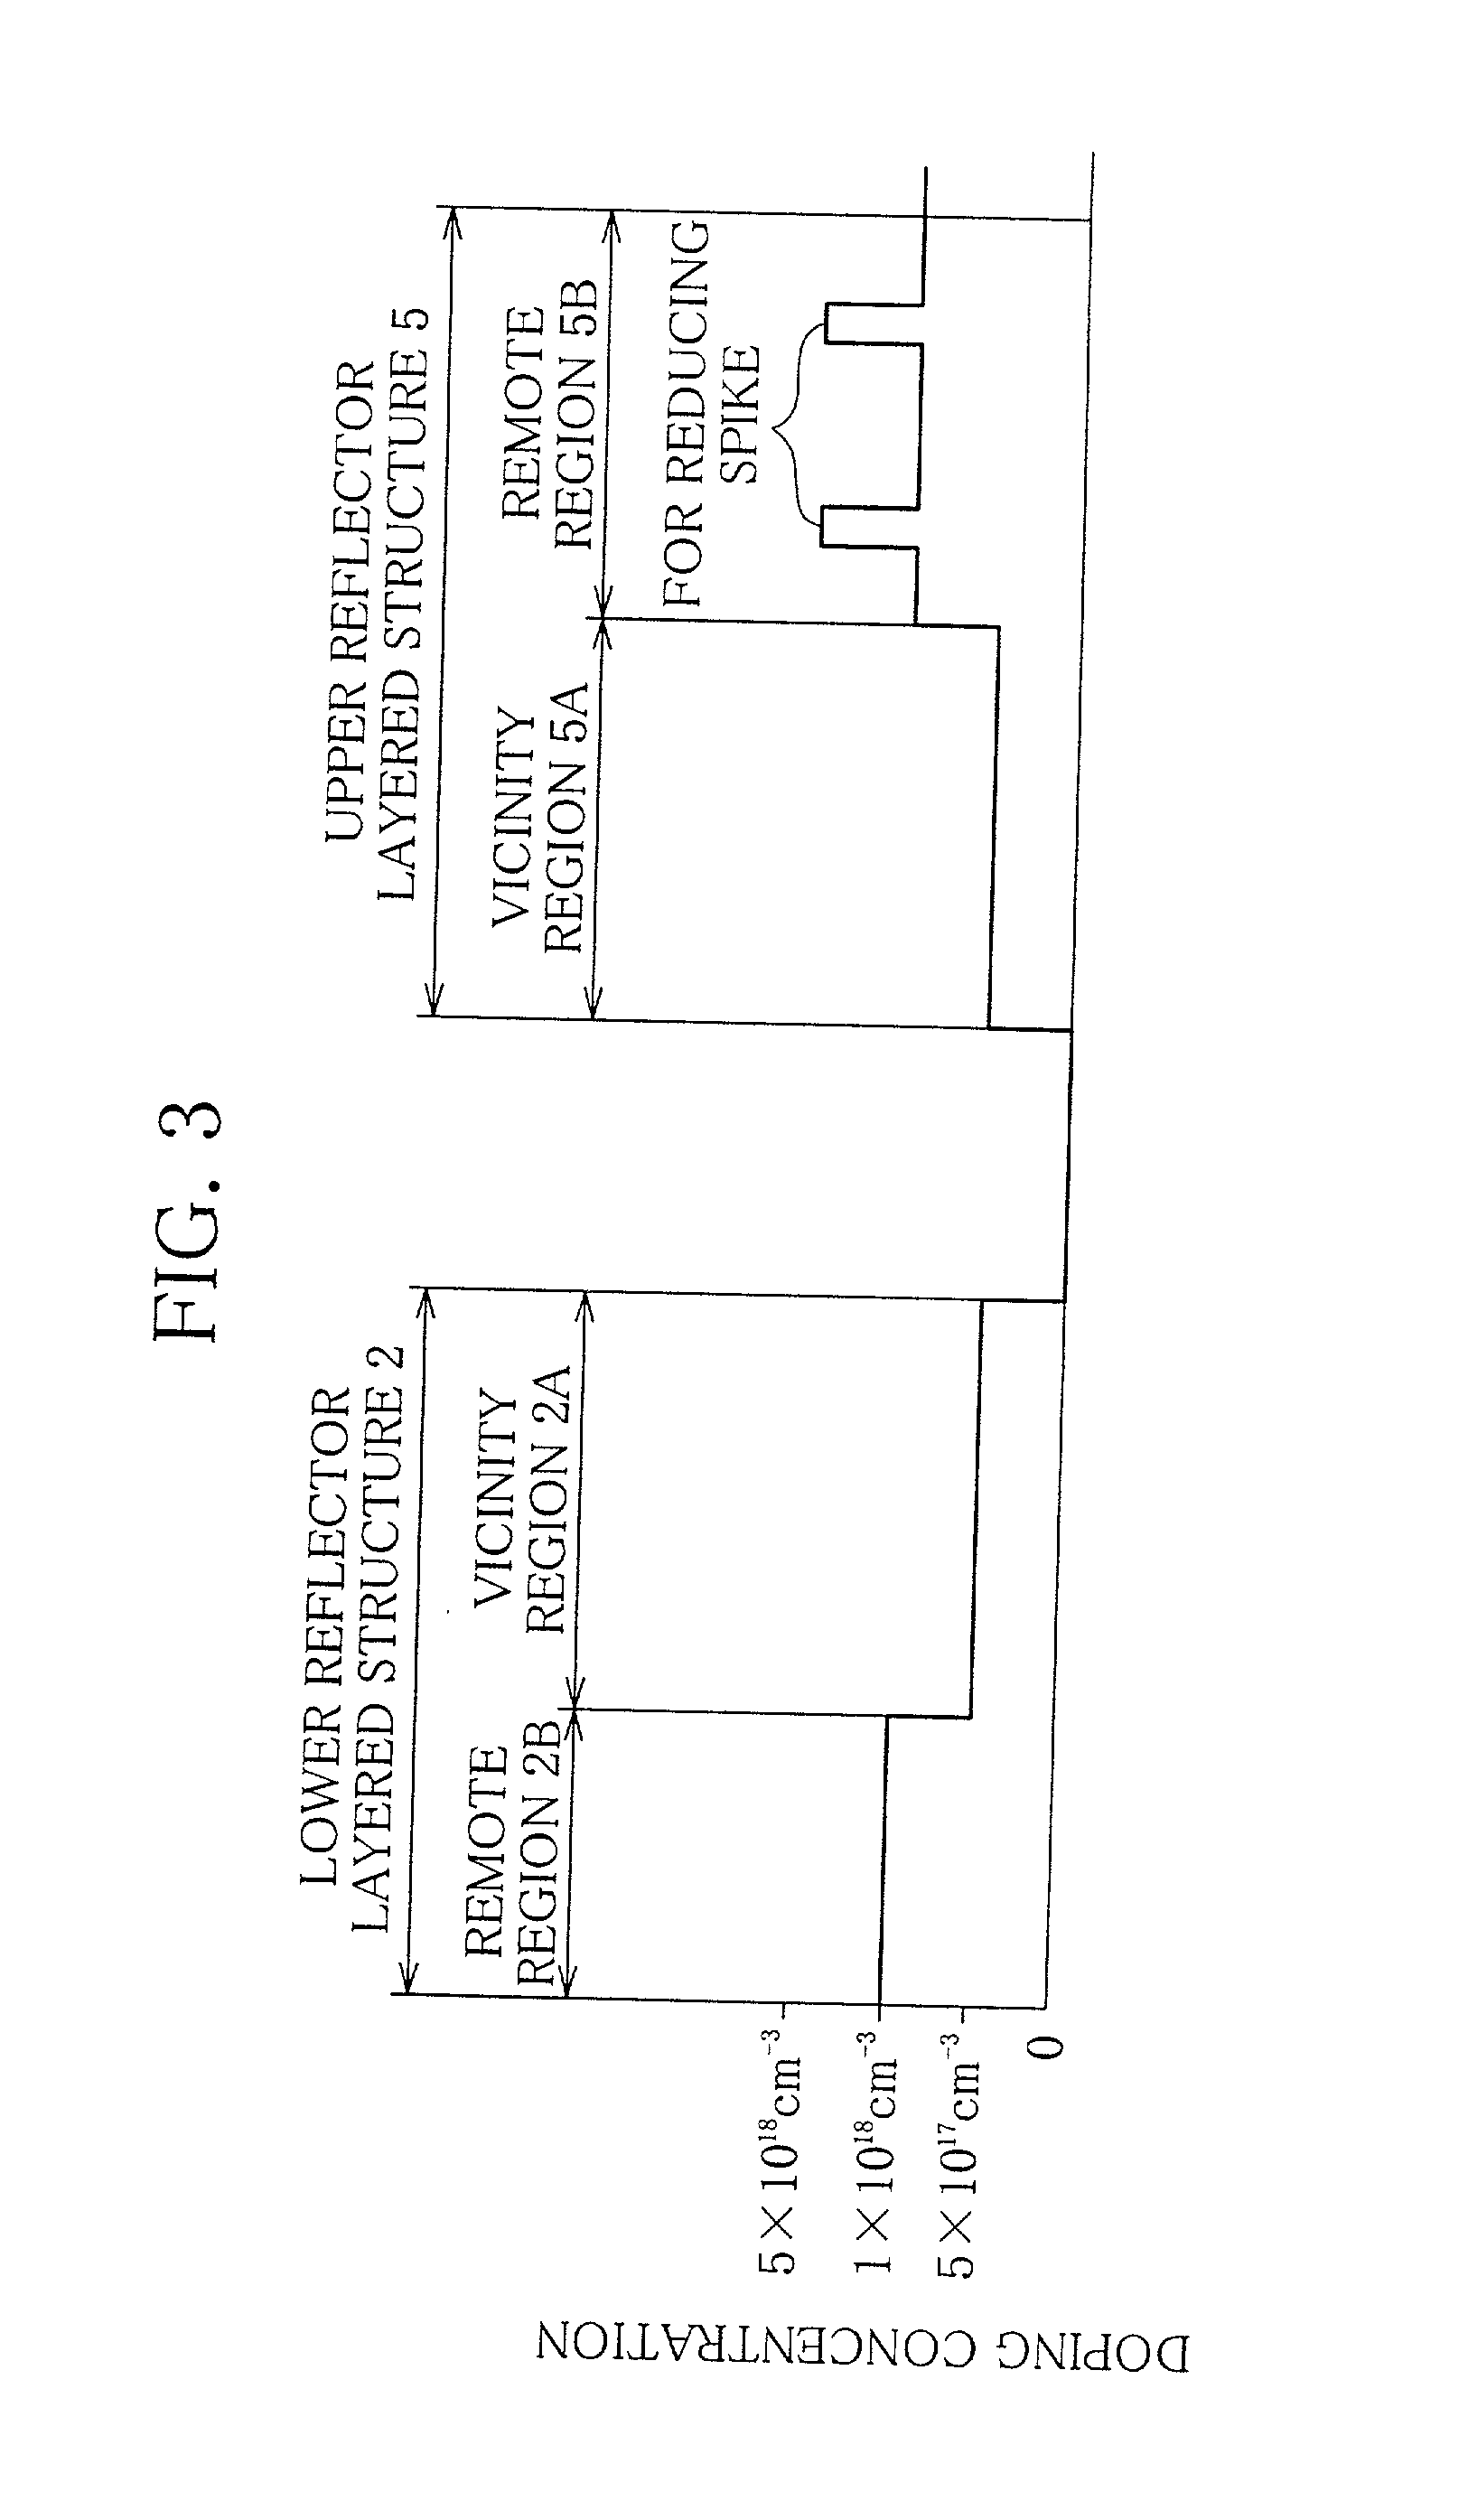 Surface emitting semiconductor laser device